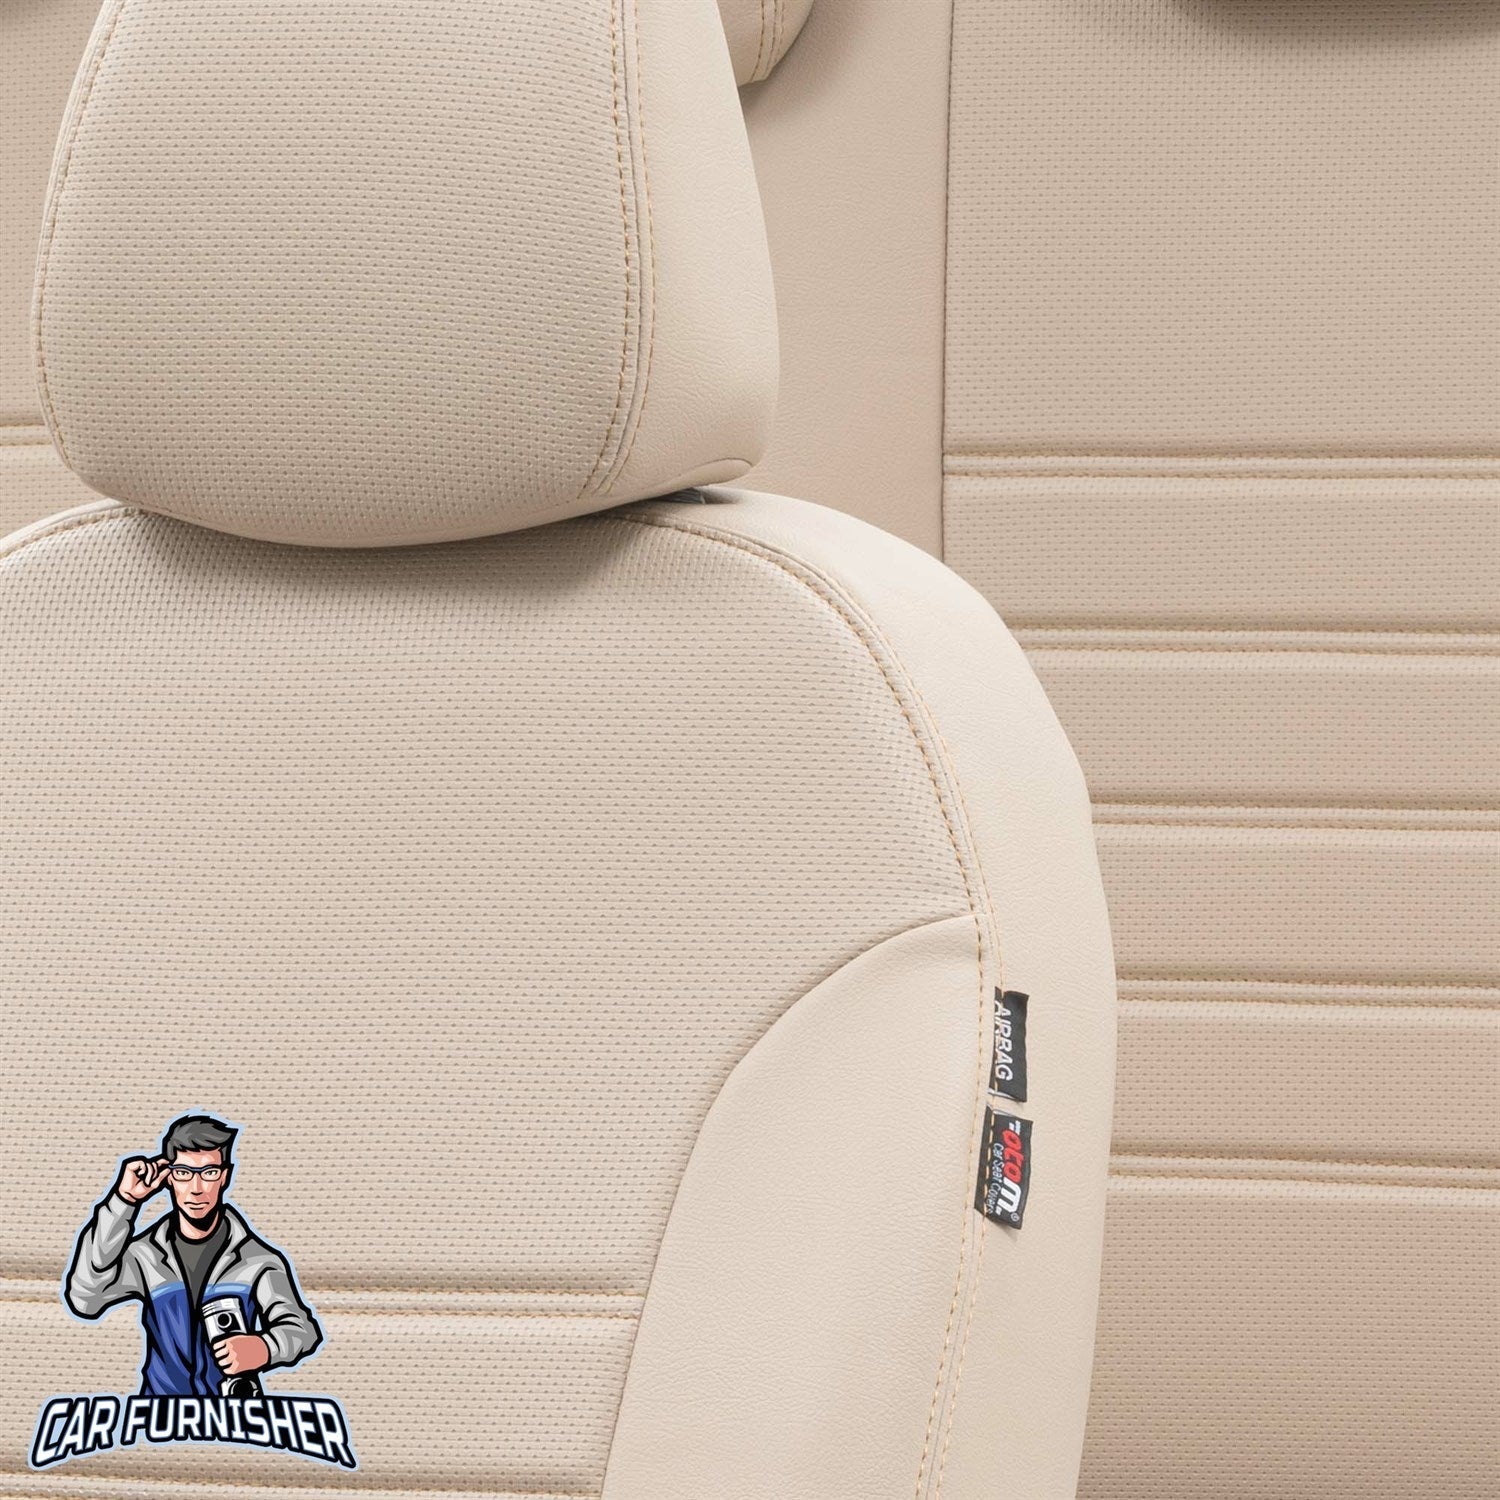 Honda HRV Seat Covers New York Leather Design Beige Leather